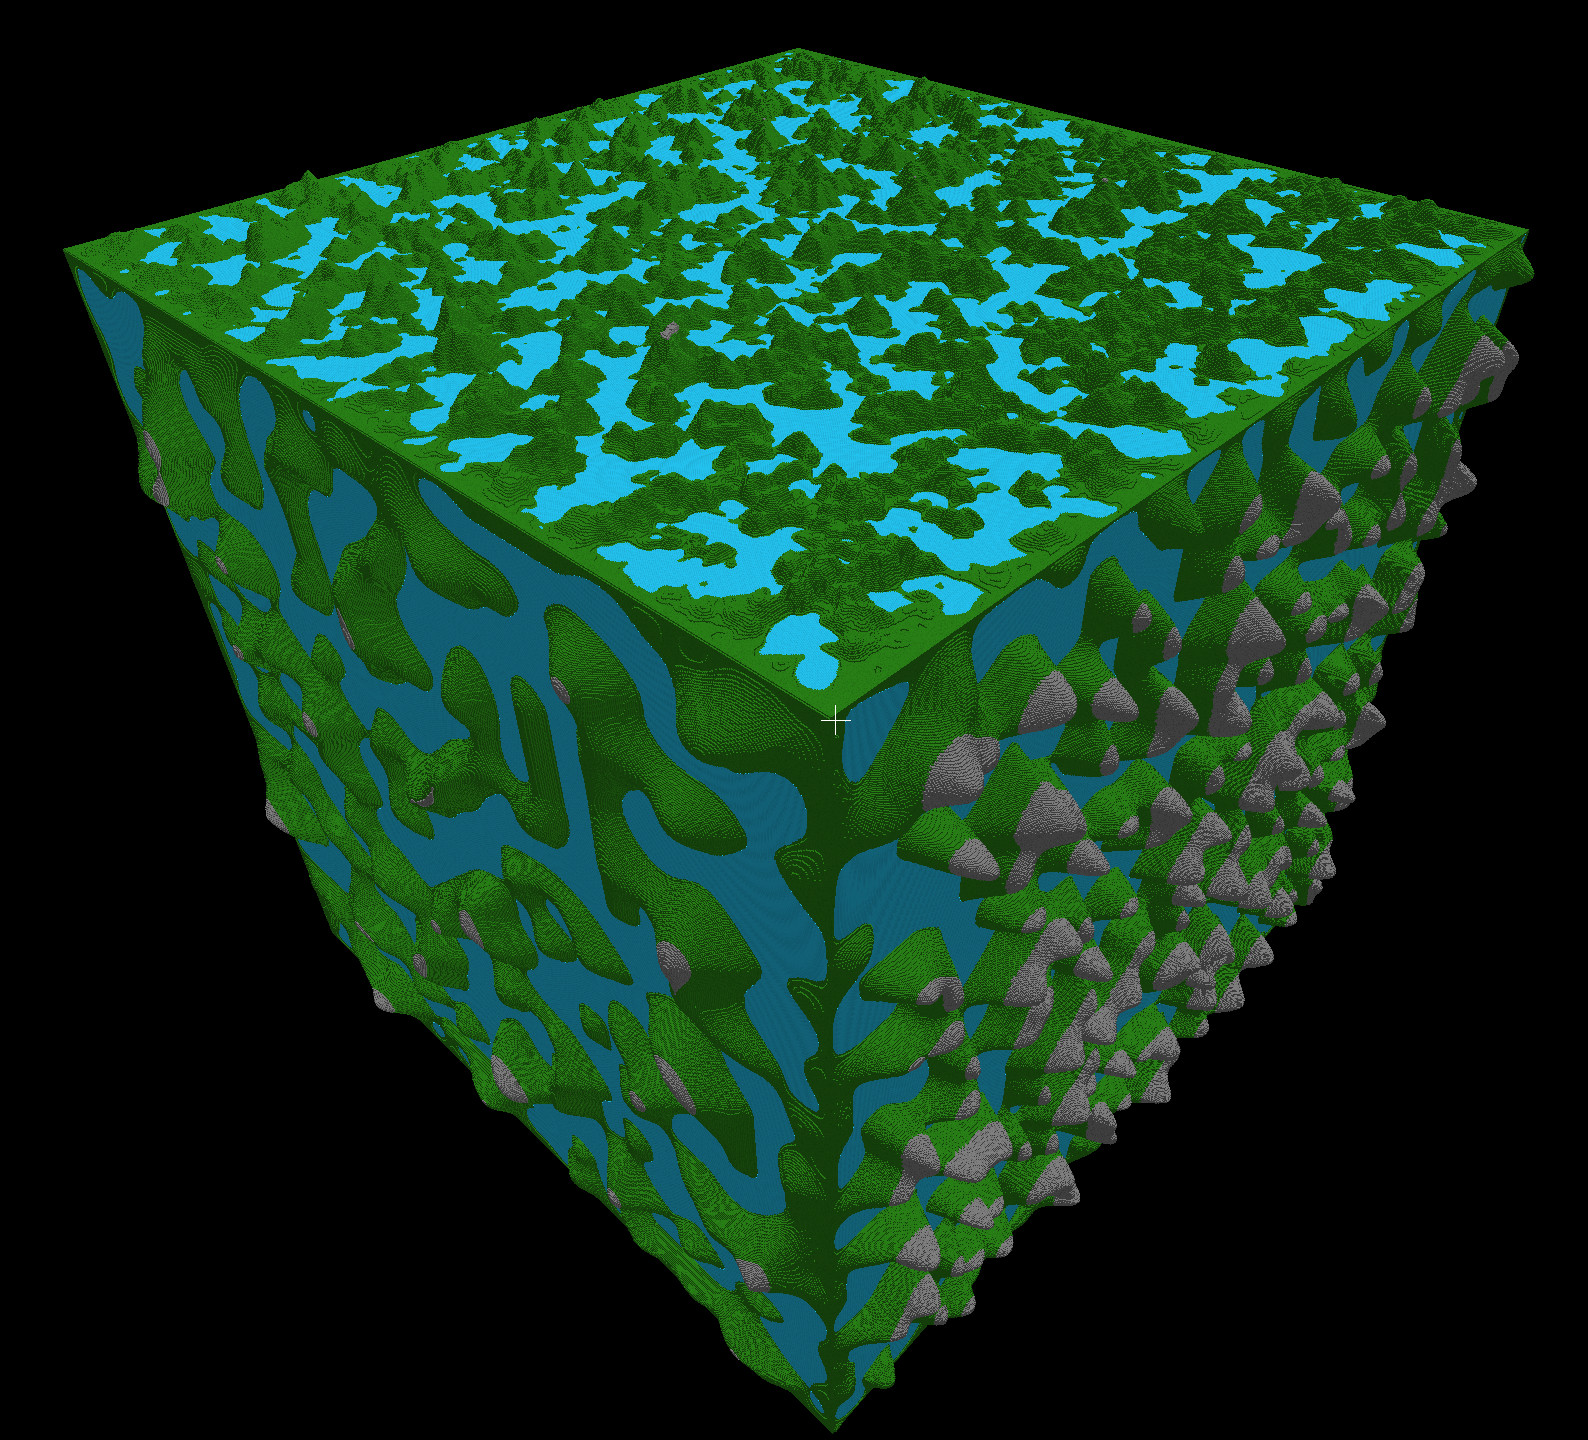 A 1024 cube planet.